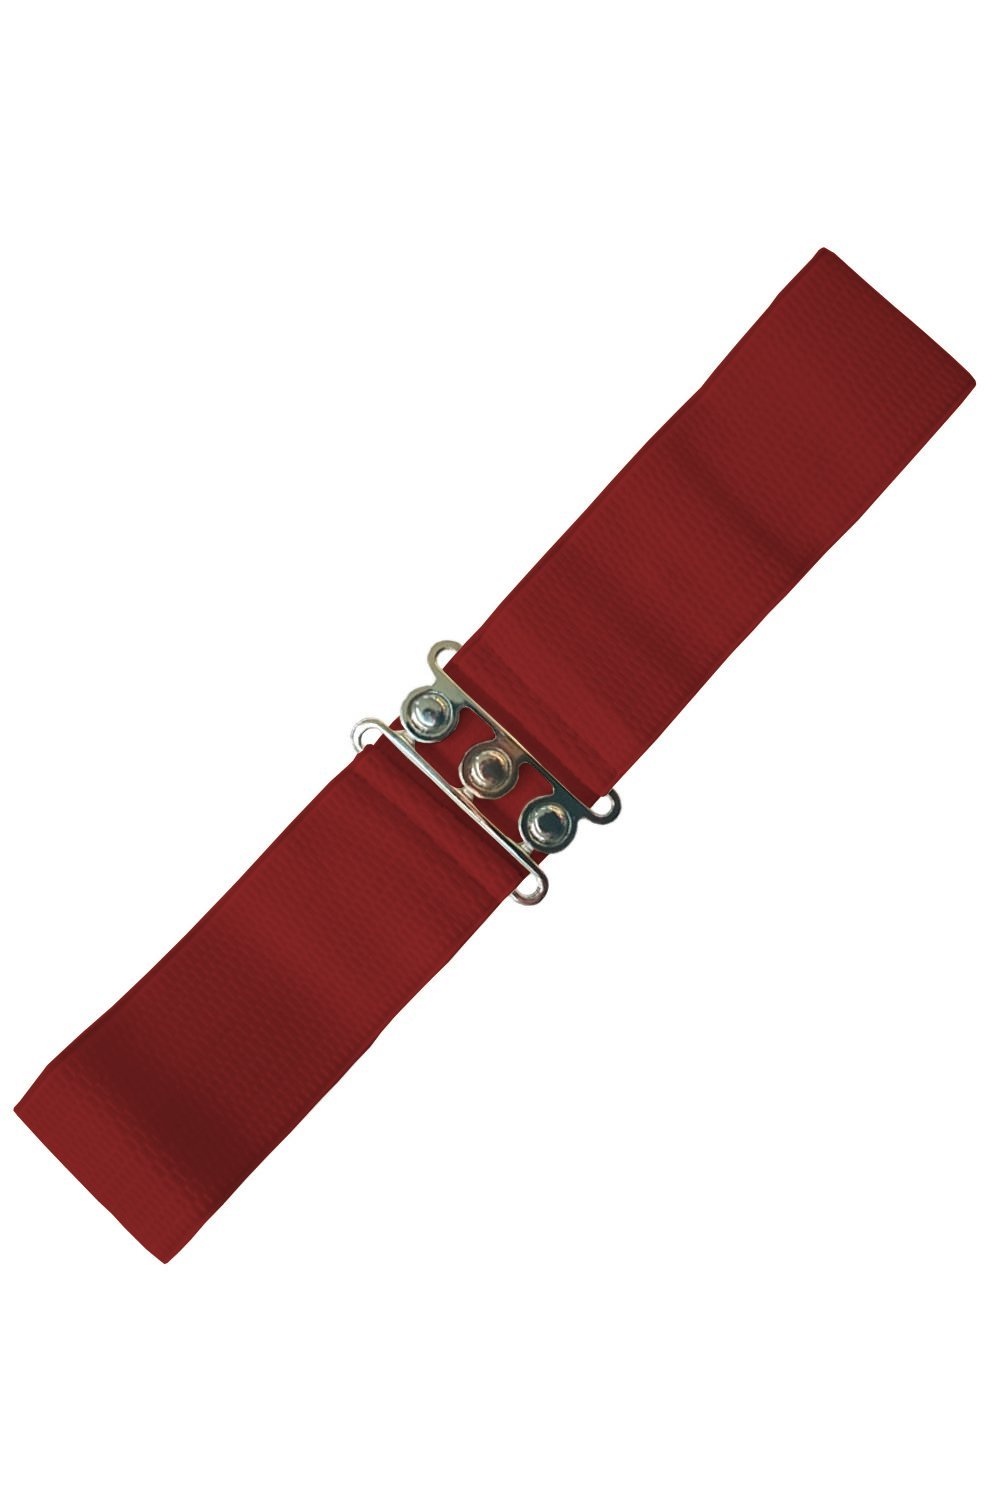 Elasticated Fifties Waspie Waist Belt - All Colours - Rockamilly-Accessories-Vintage